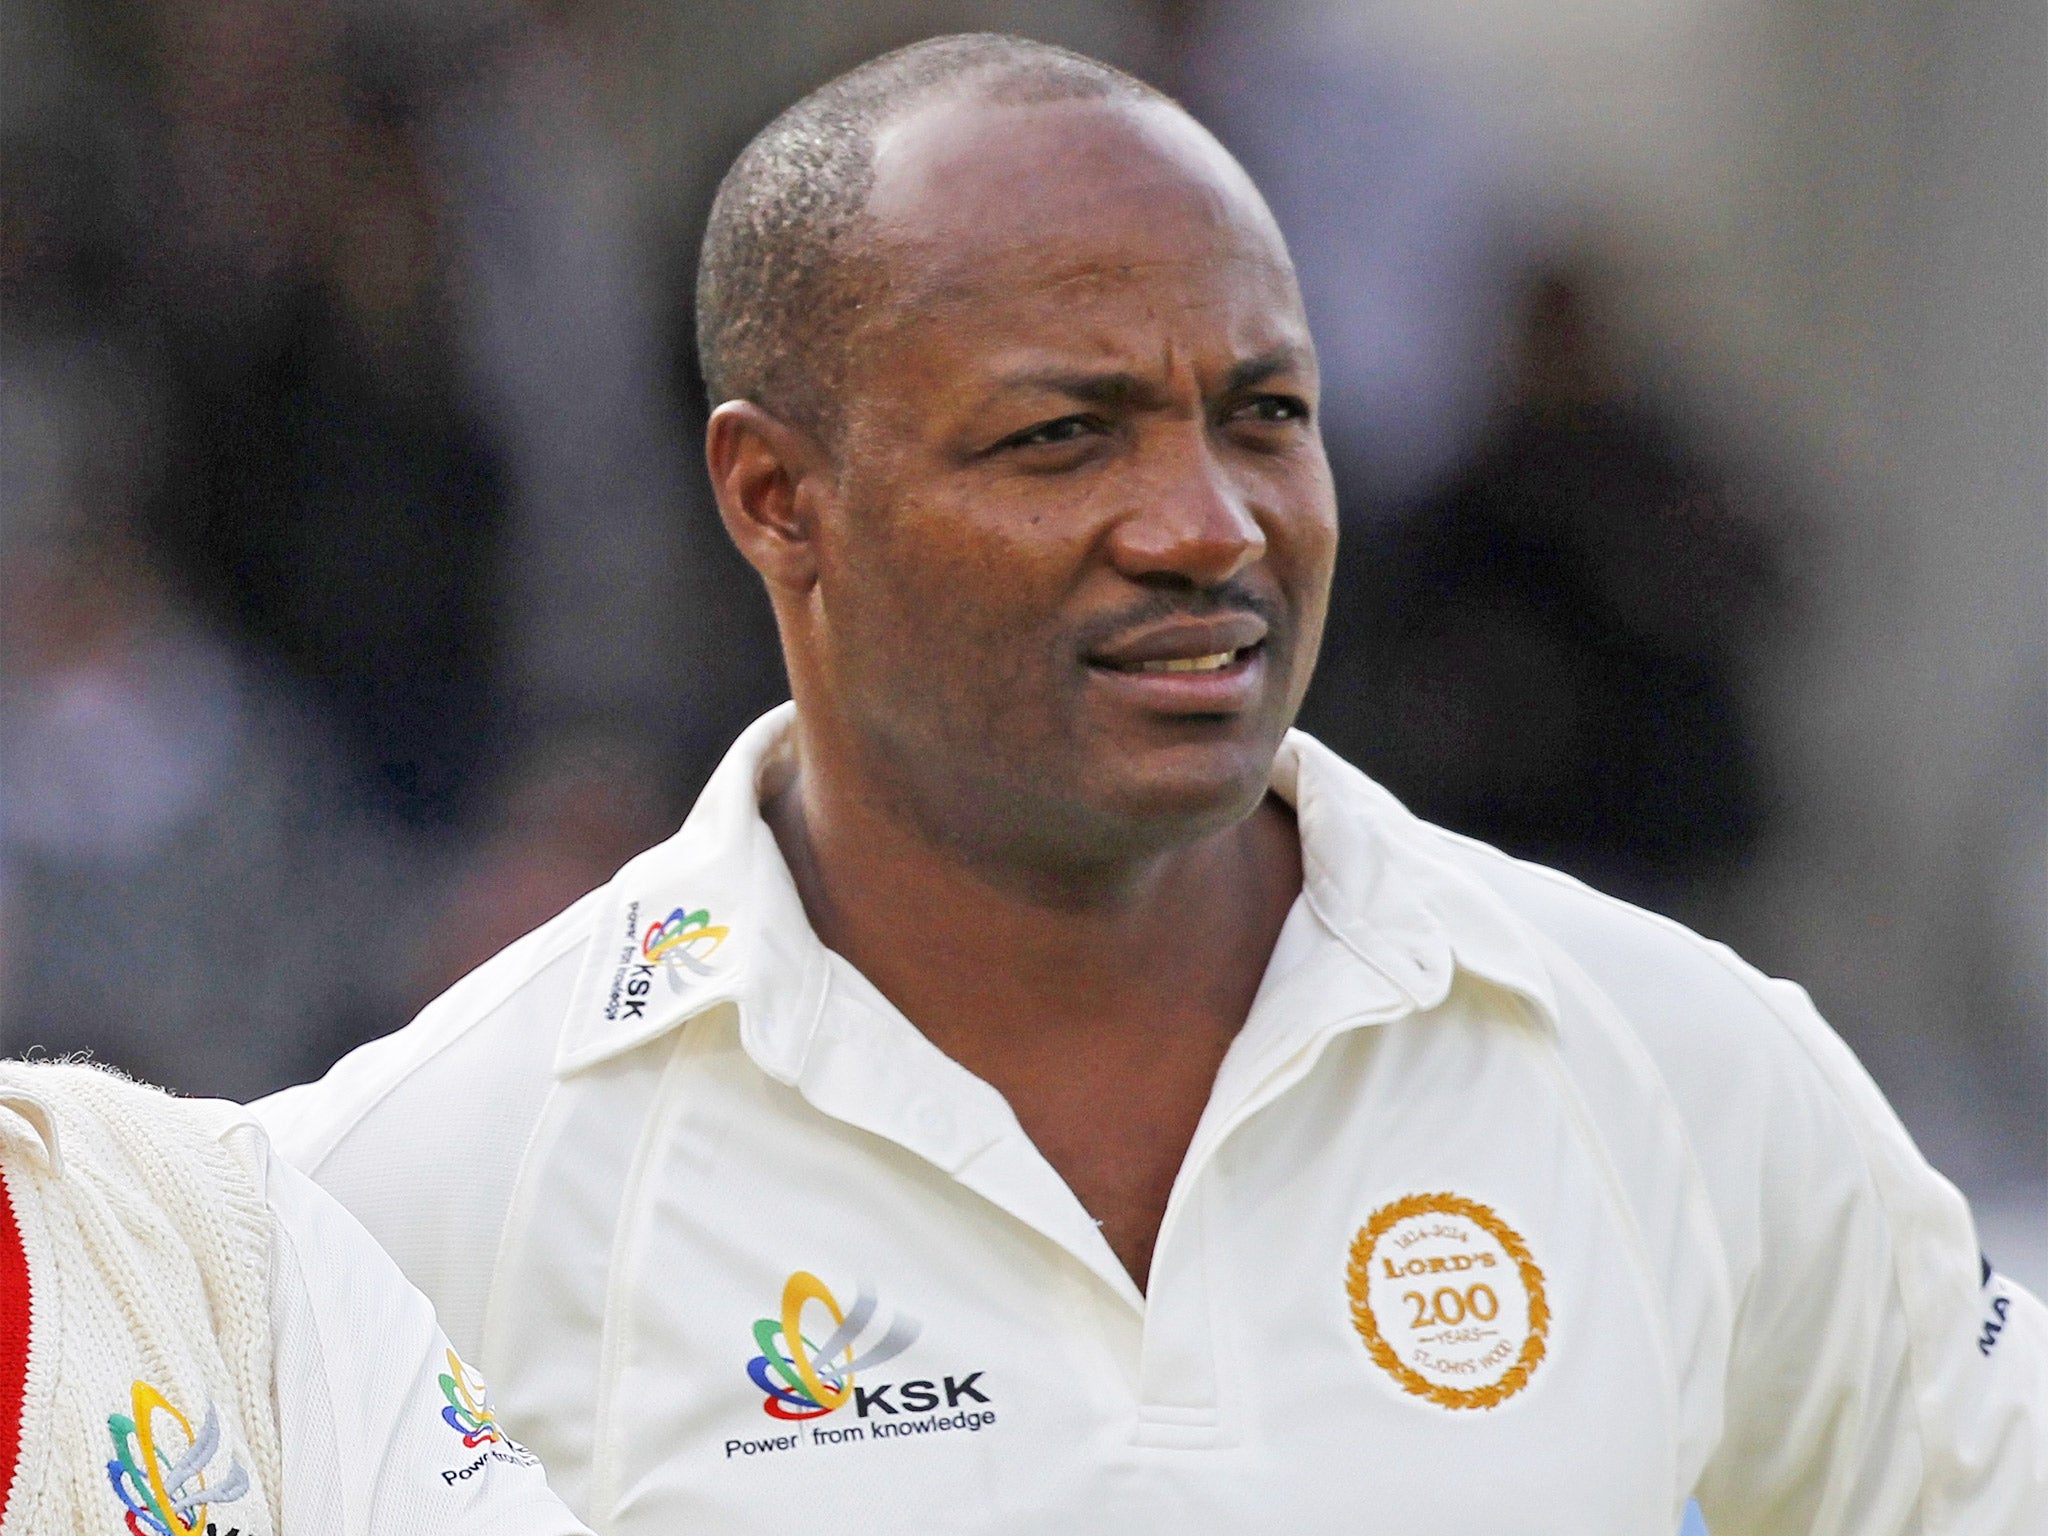 Brian Lara heads a stellar cast at the MCL that includes Michael Vaughan and Adam Gilchrist